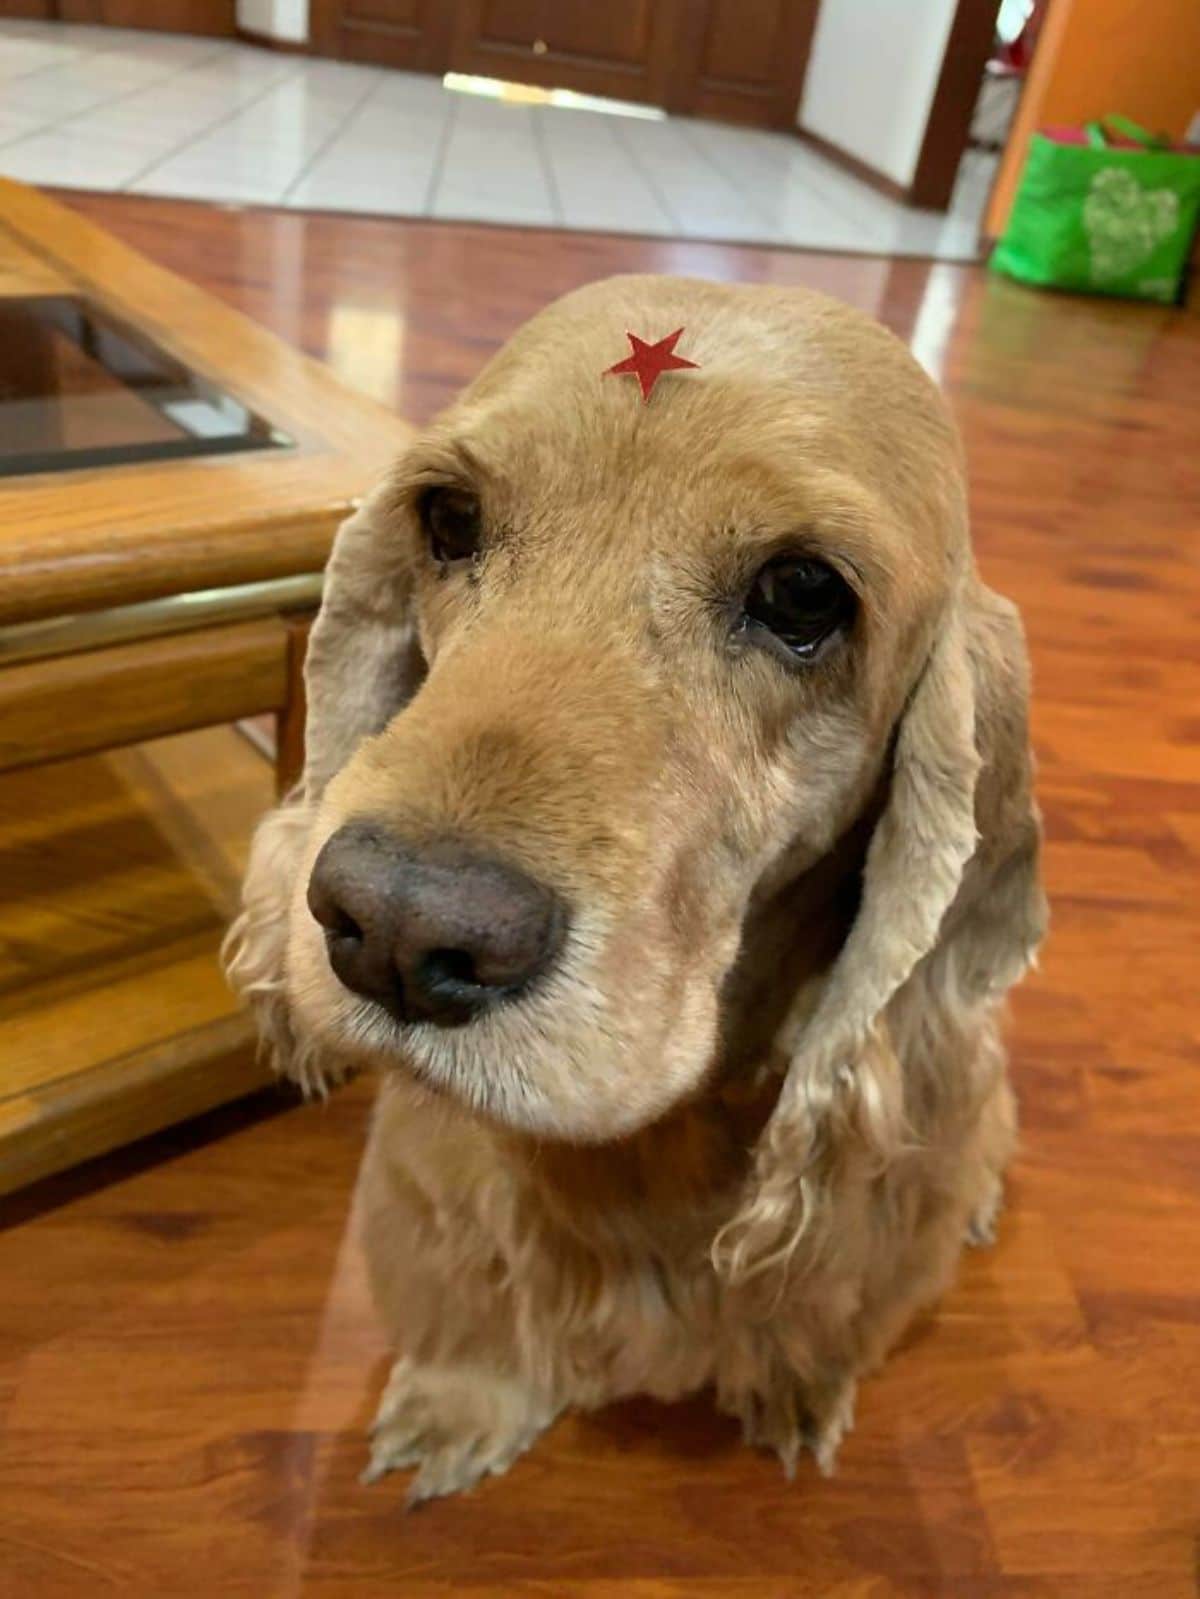 old brown dog with a red star pasted on the forehead